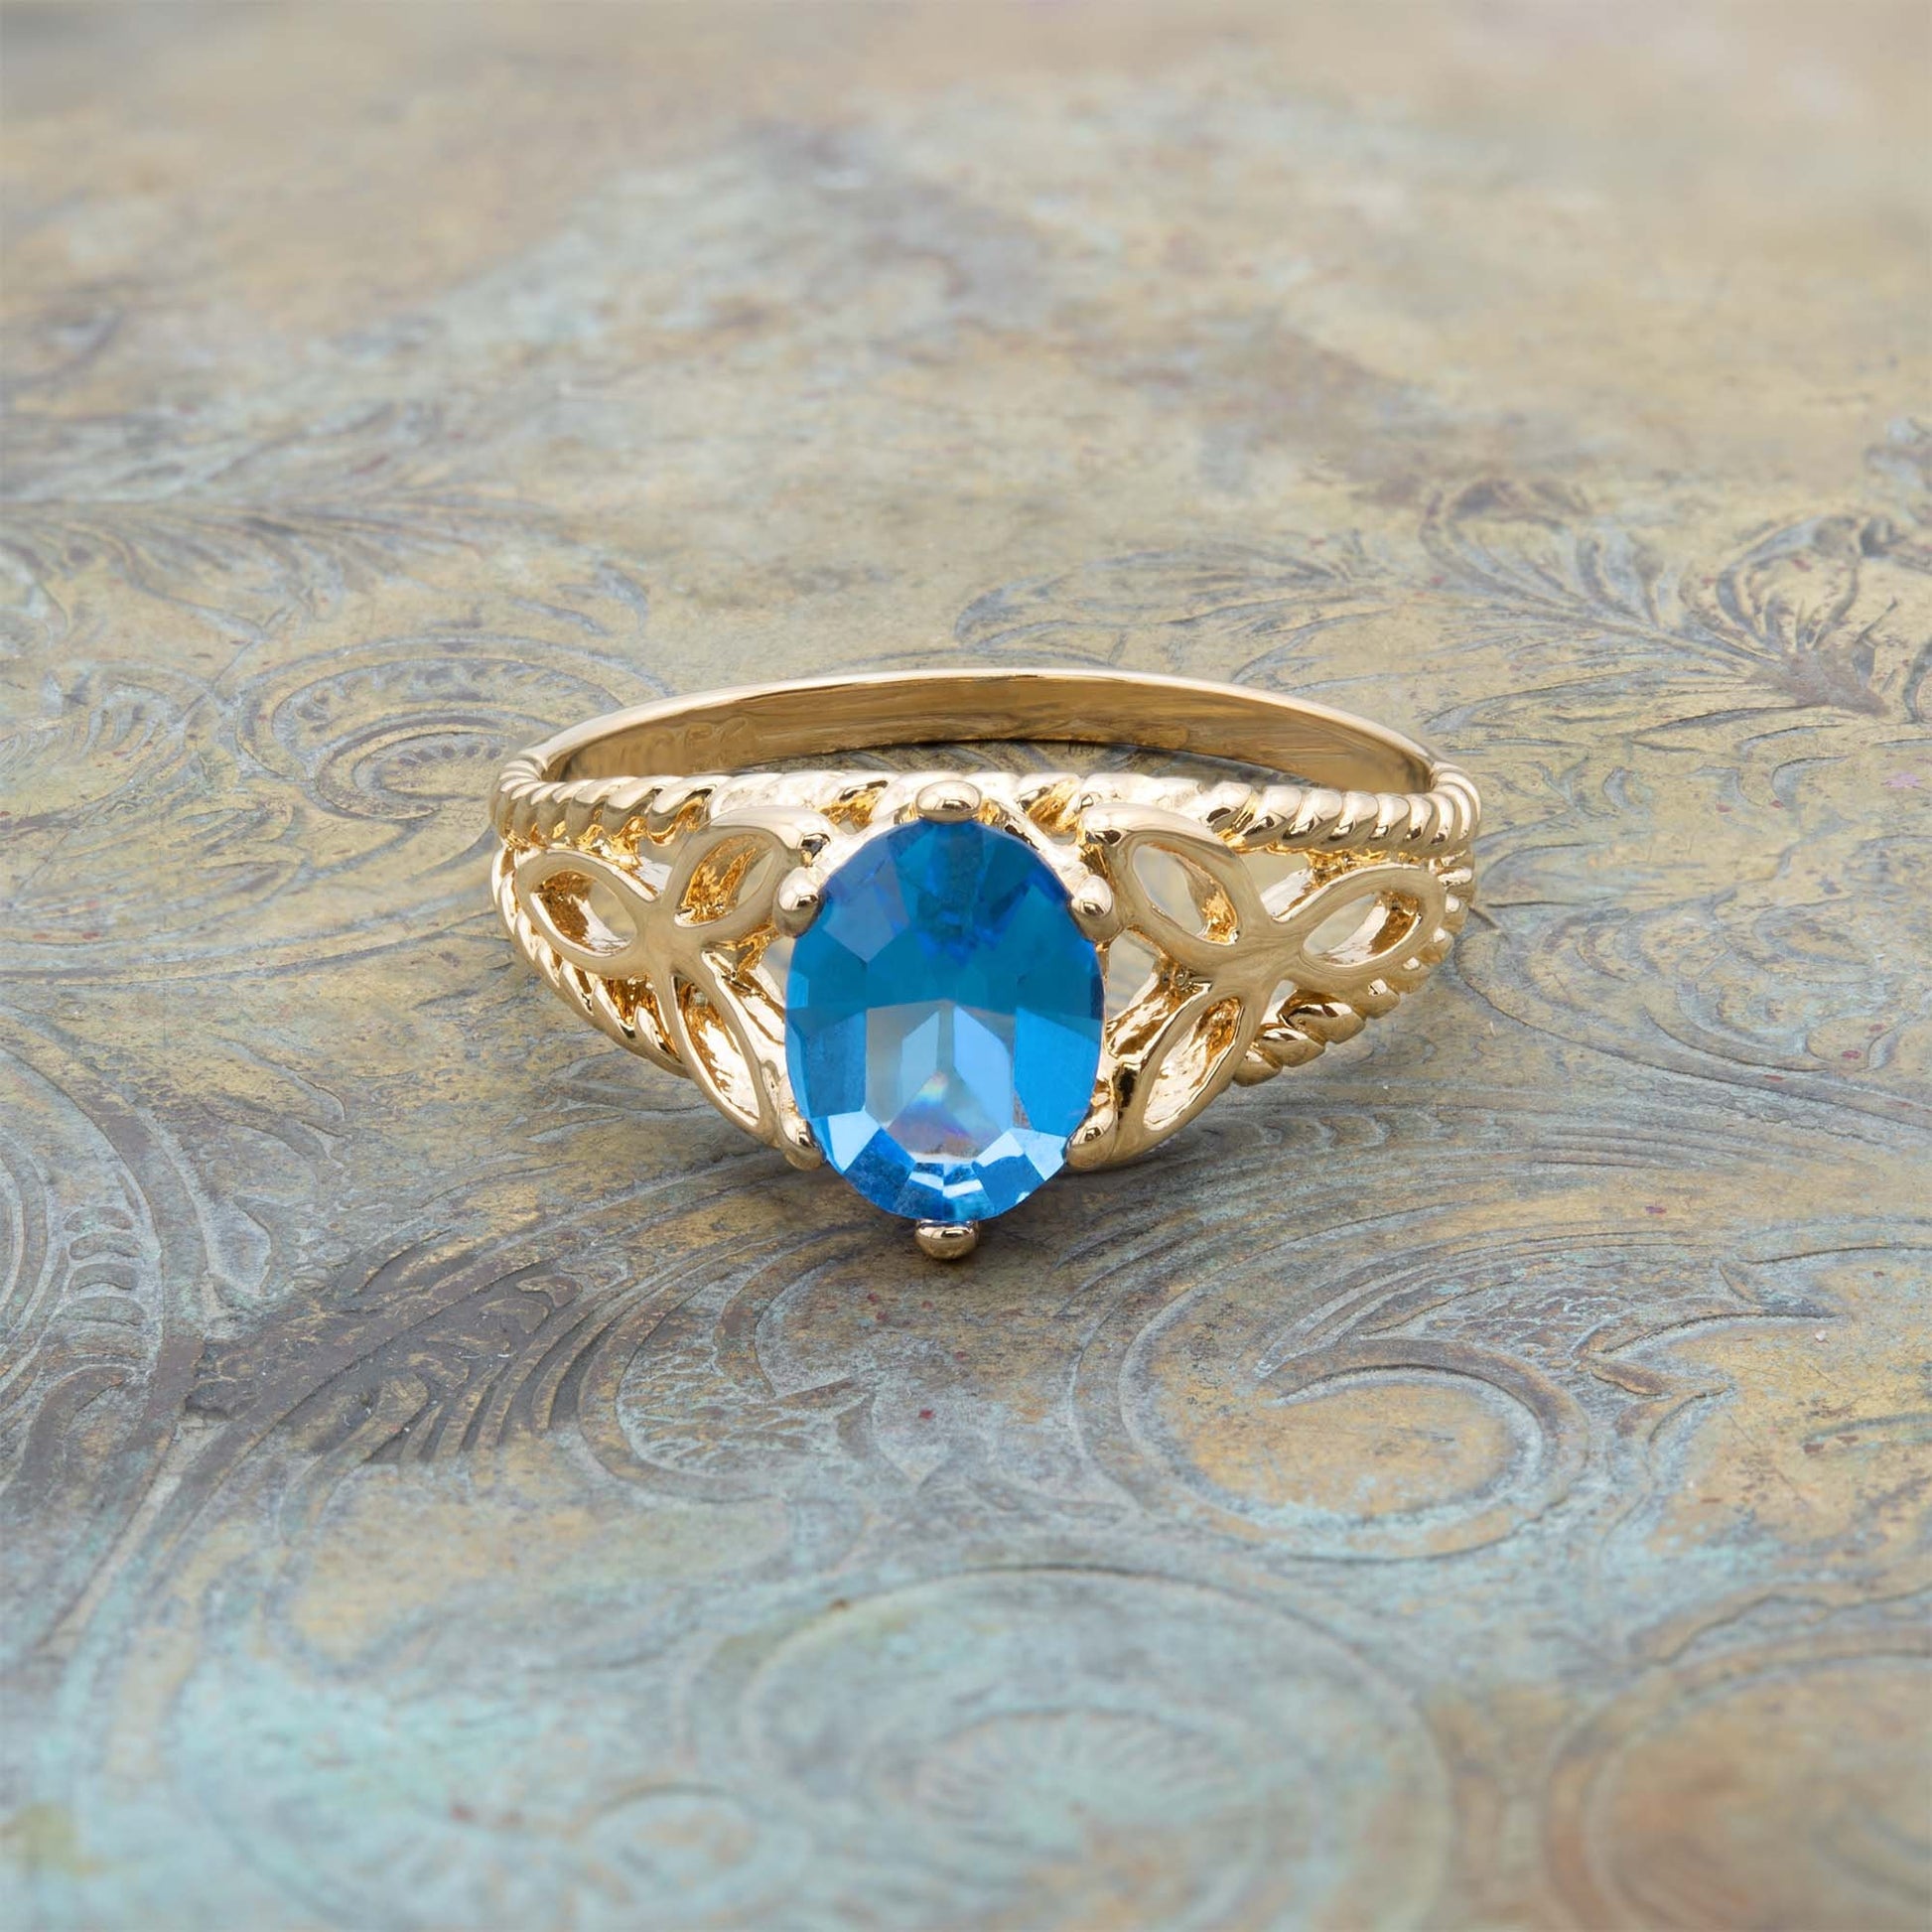 Vintage Ring Blue Sapphire 18k Gold Filigree Cocktail Ring Antique Womans Jewlery Victorian Ornate Rings #R300 - Limited Stock - Never Worn